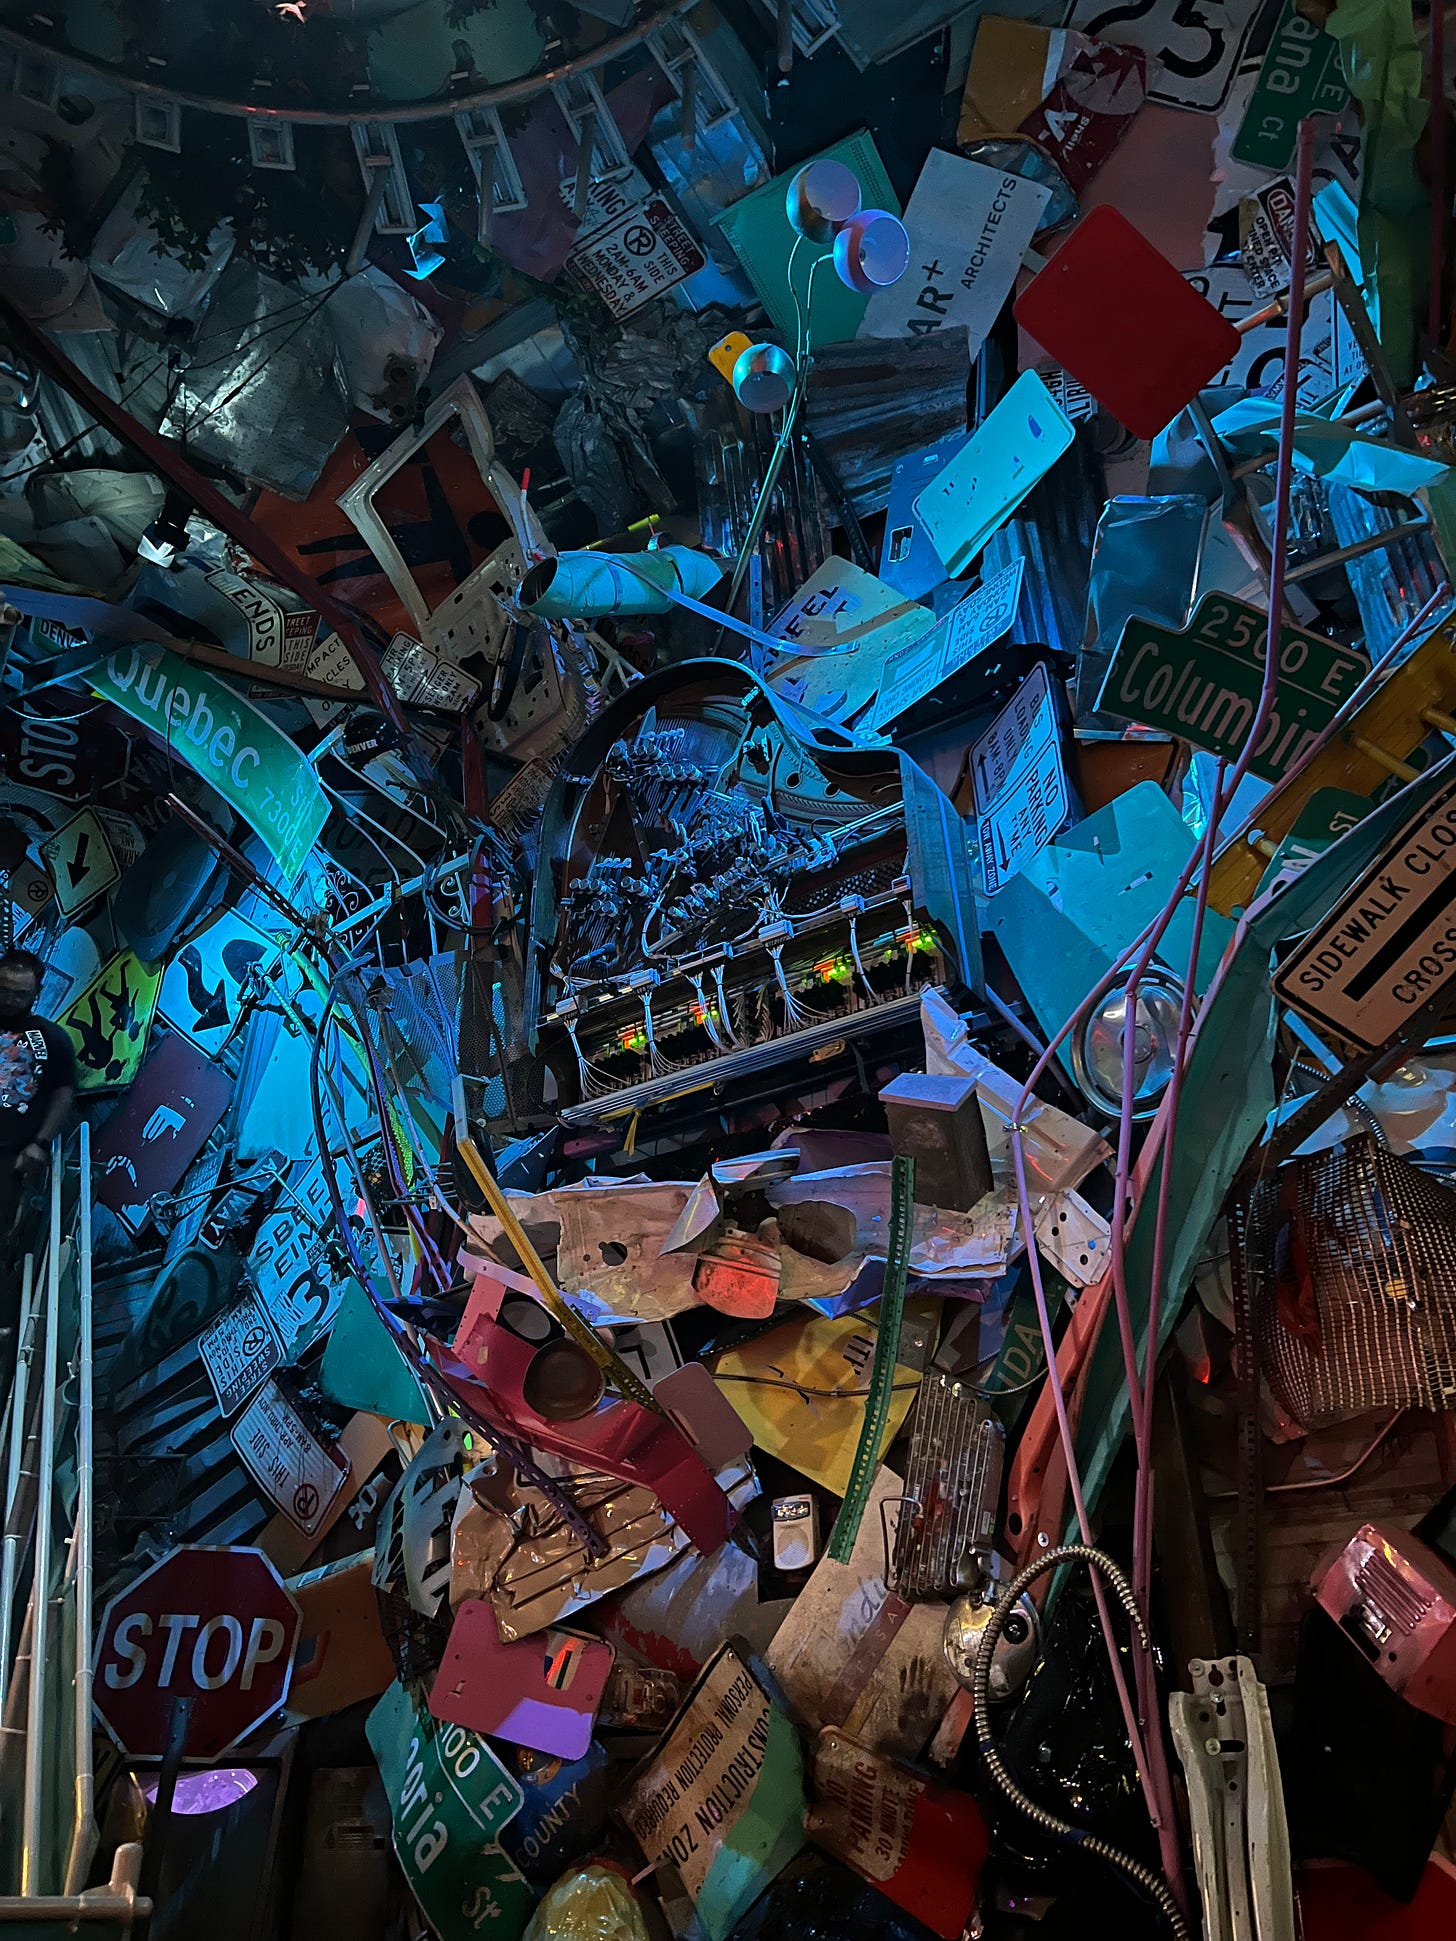 Image of part of the Meow Wolf (Denver) art exhibit, which includes a room full of walls and walls of trash.